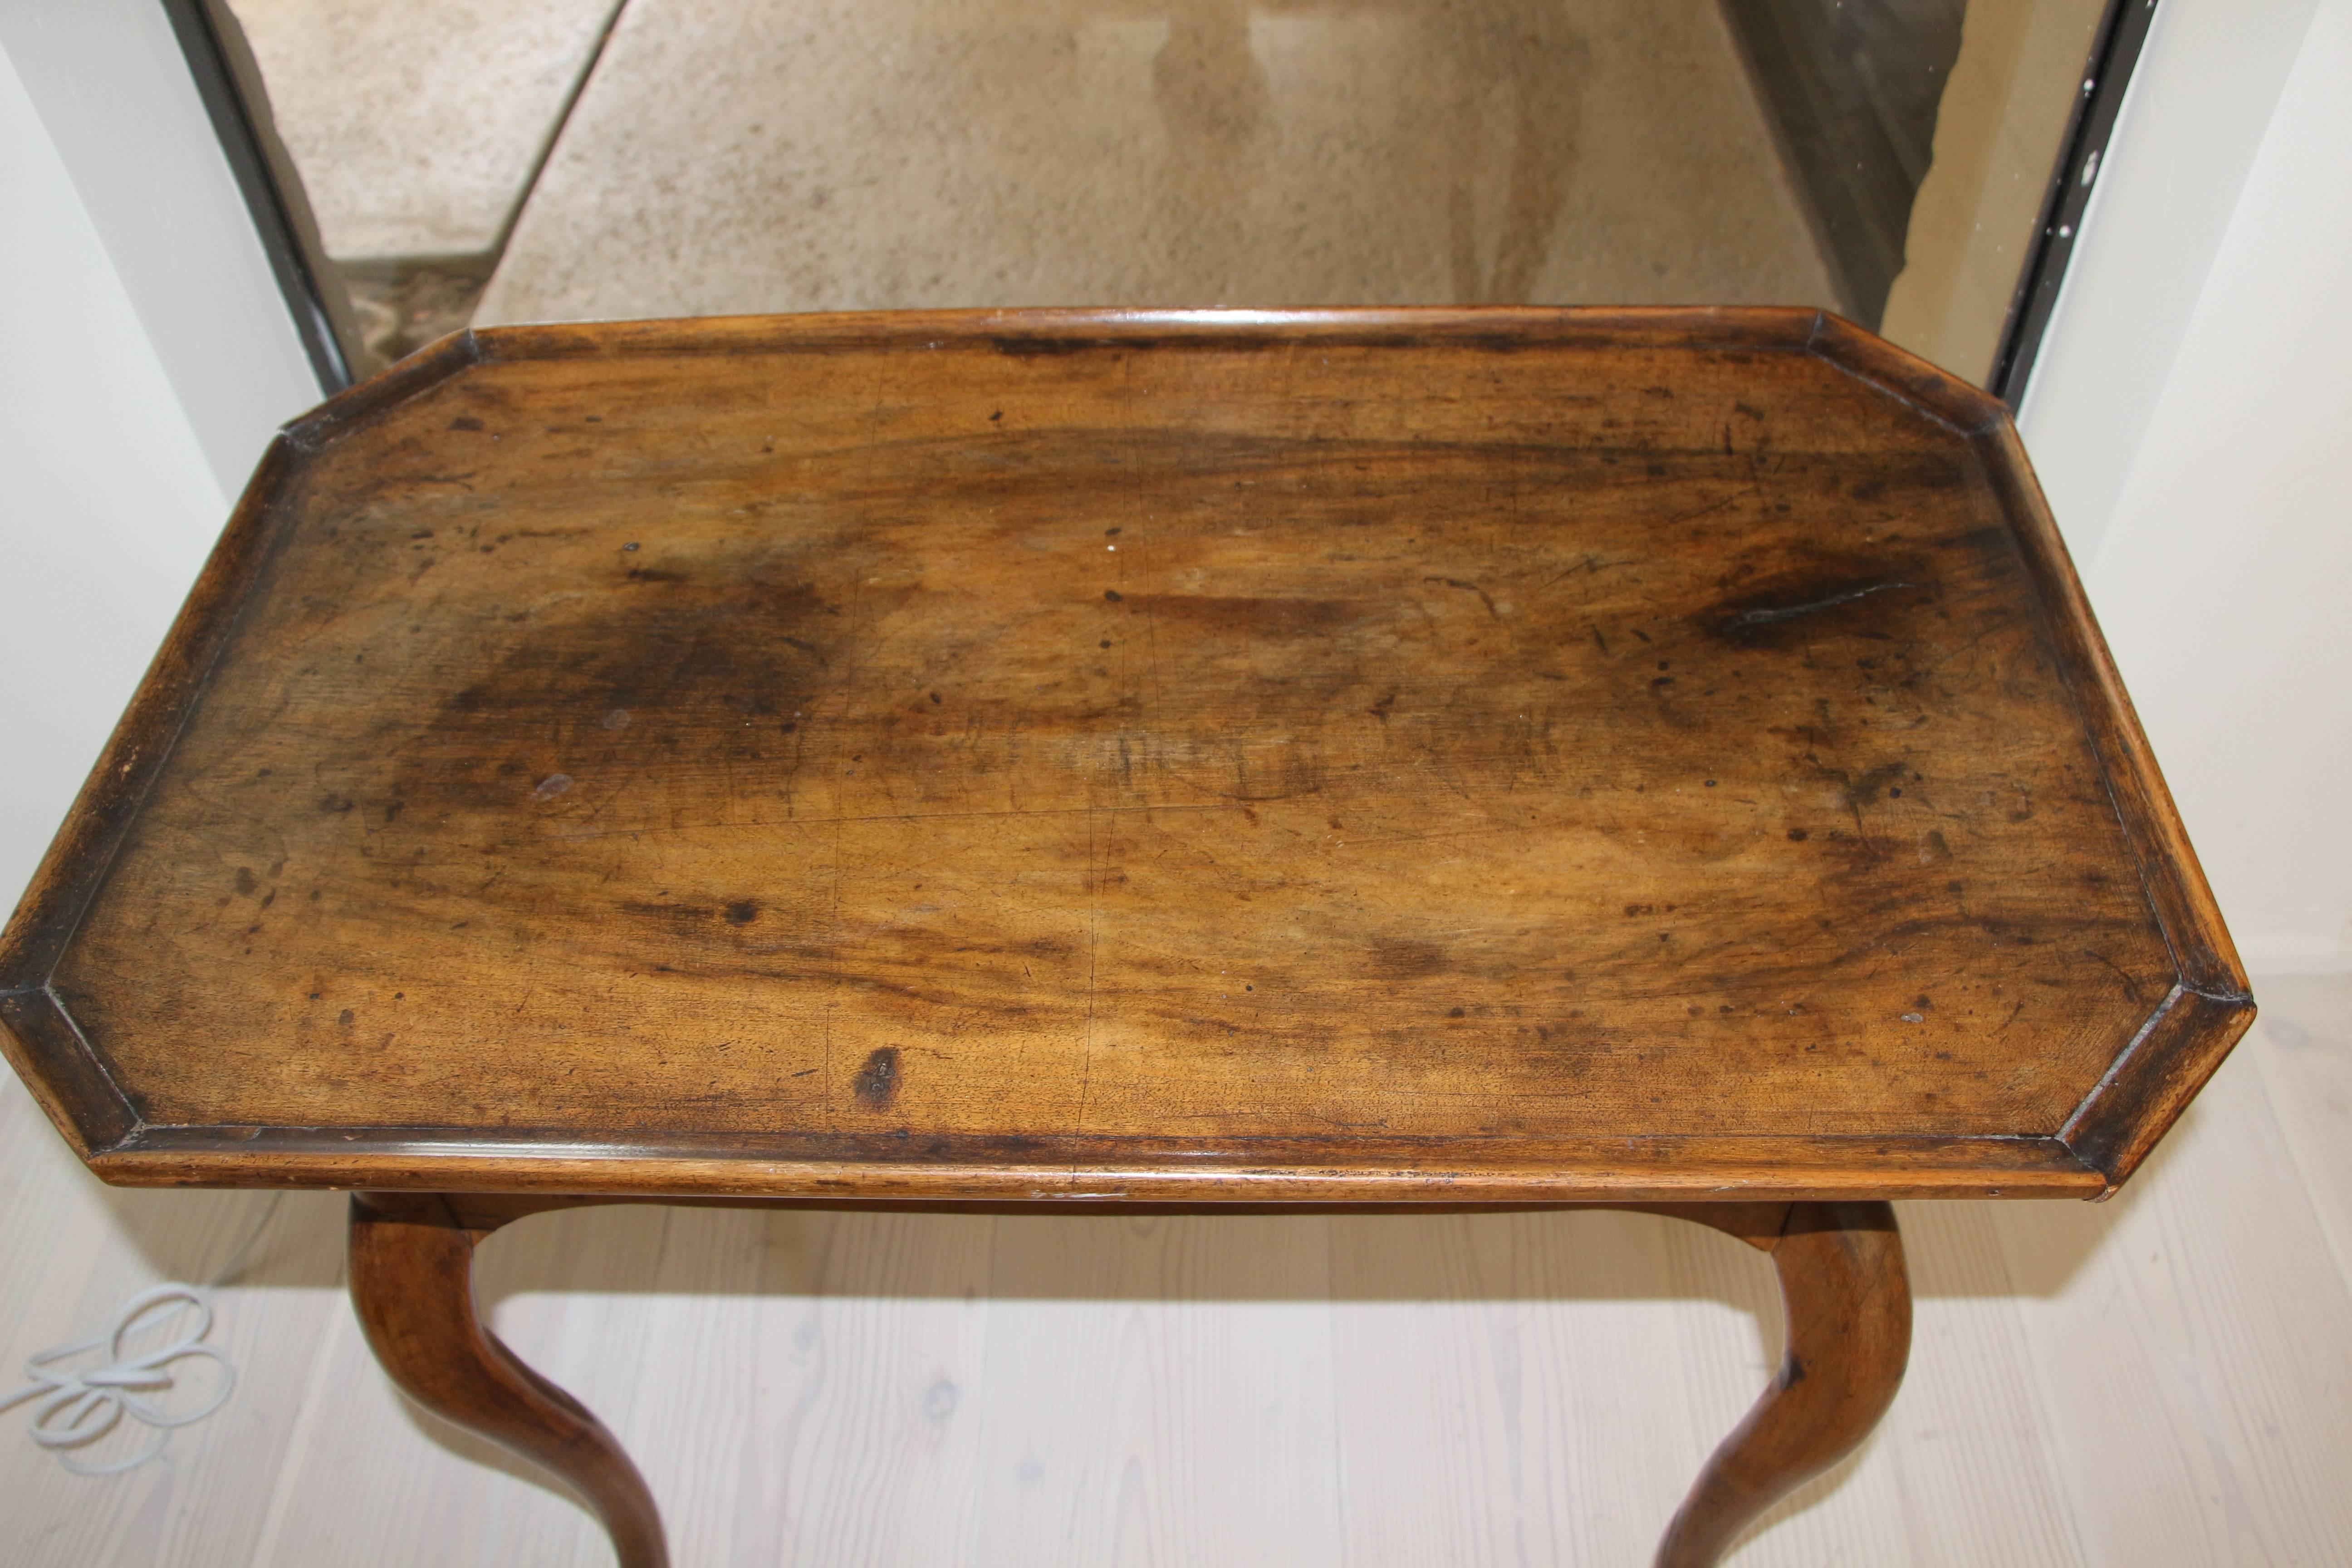 A very pretty French probably Louis XV 18th century table with hoof feet and one drawer. Nice overall patina and a very delicate looking table. Purchased at a major auction house. Please note that the table has age appropriate problems and it's